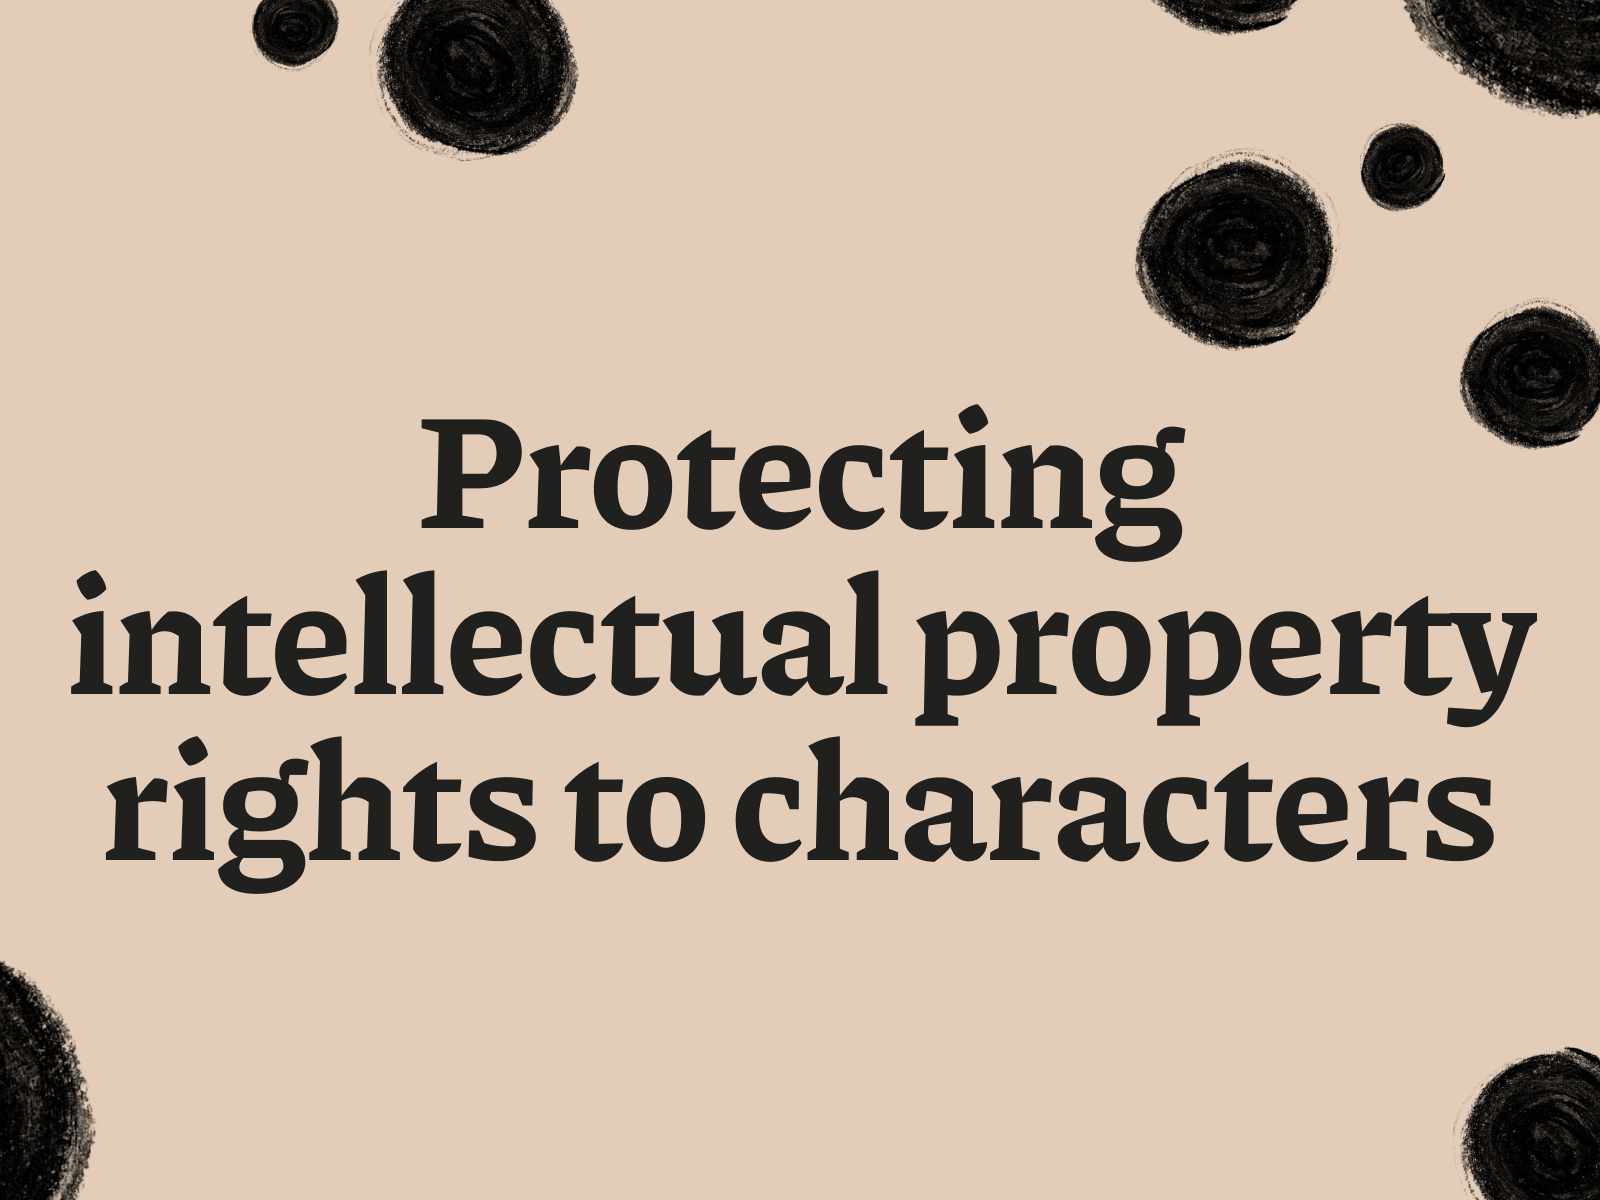 Copyright vs. trademark: how to protect rights to characters more effectively